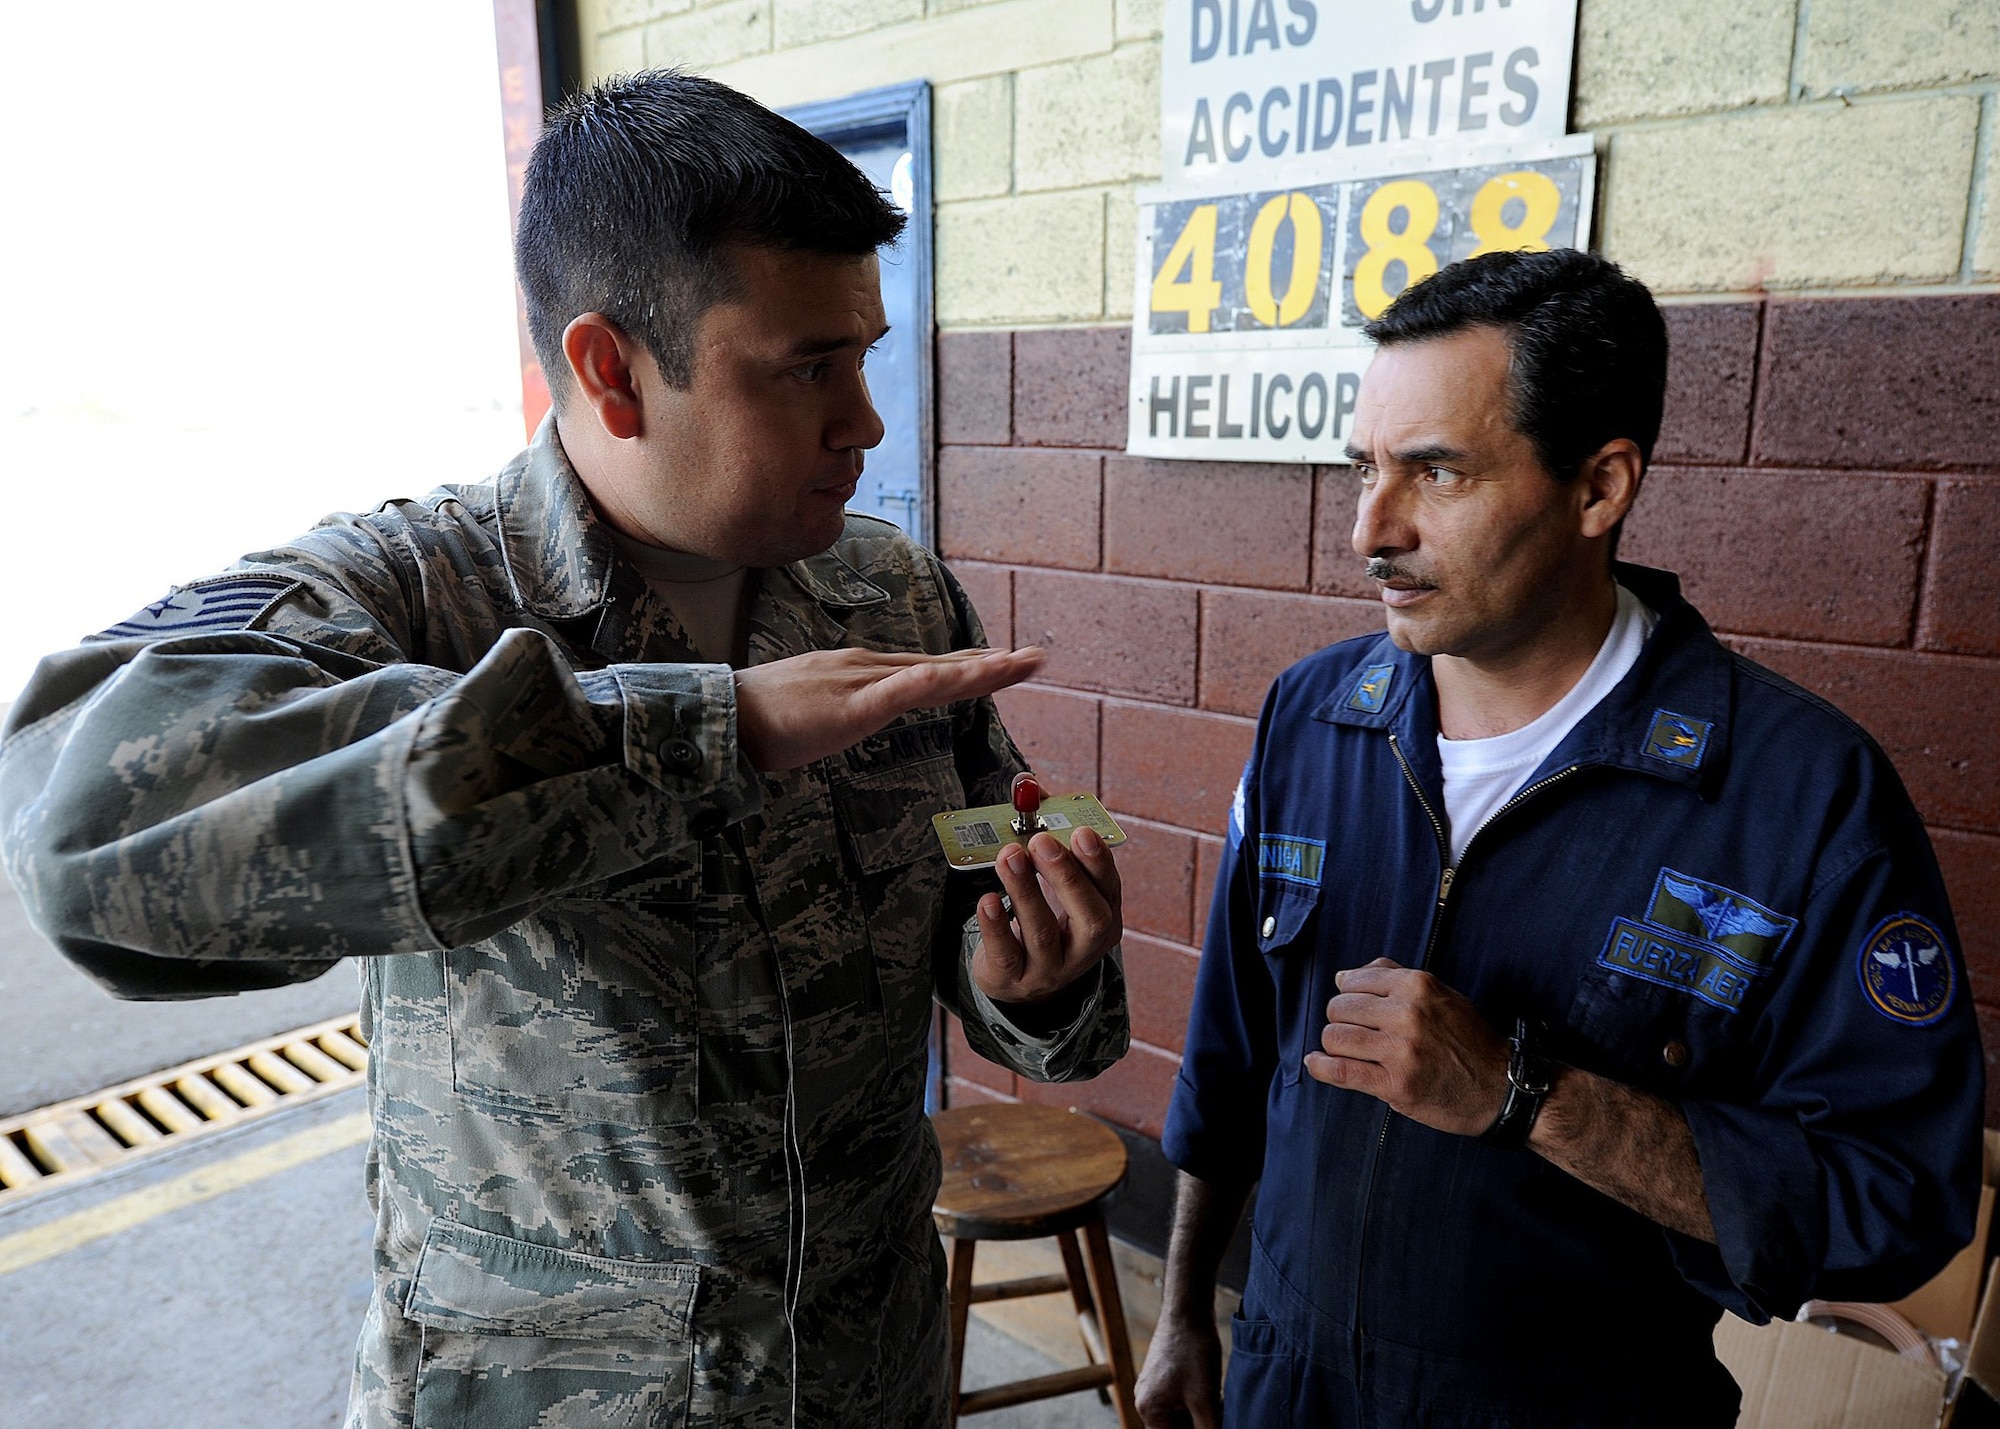 Technical Sgt. Ruben Sigala, Inter-American Air Forces Academy instructor, explains to a Honduran Air Force member the antenna placement on the helicopter tail boom, in Tegucigalpa, Honduras, Feb. 3. Sigala is one of two Airmen from IAAFA working with the 571st Mobility Support Advisory Squadron in support of a month-long Building Partner Capacity mission in Honduras.  (U.S. Air Force photo by Tech. Sgt. Lesley Waters)